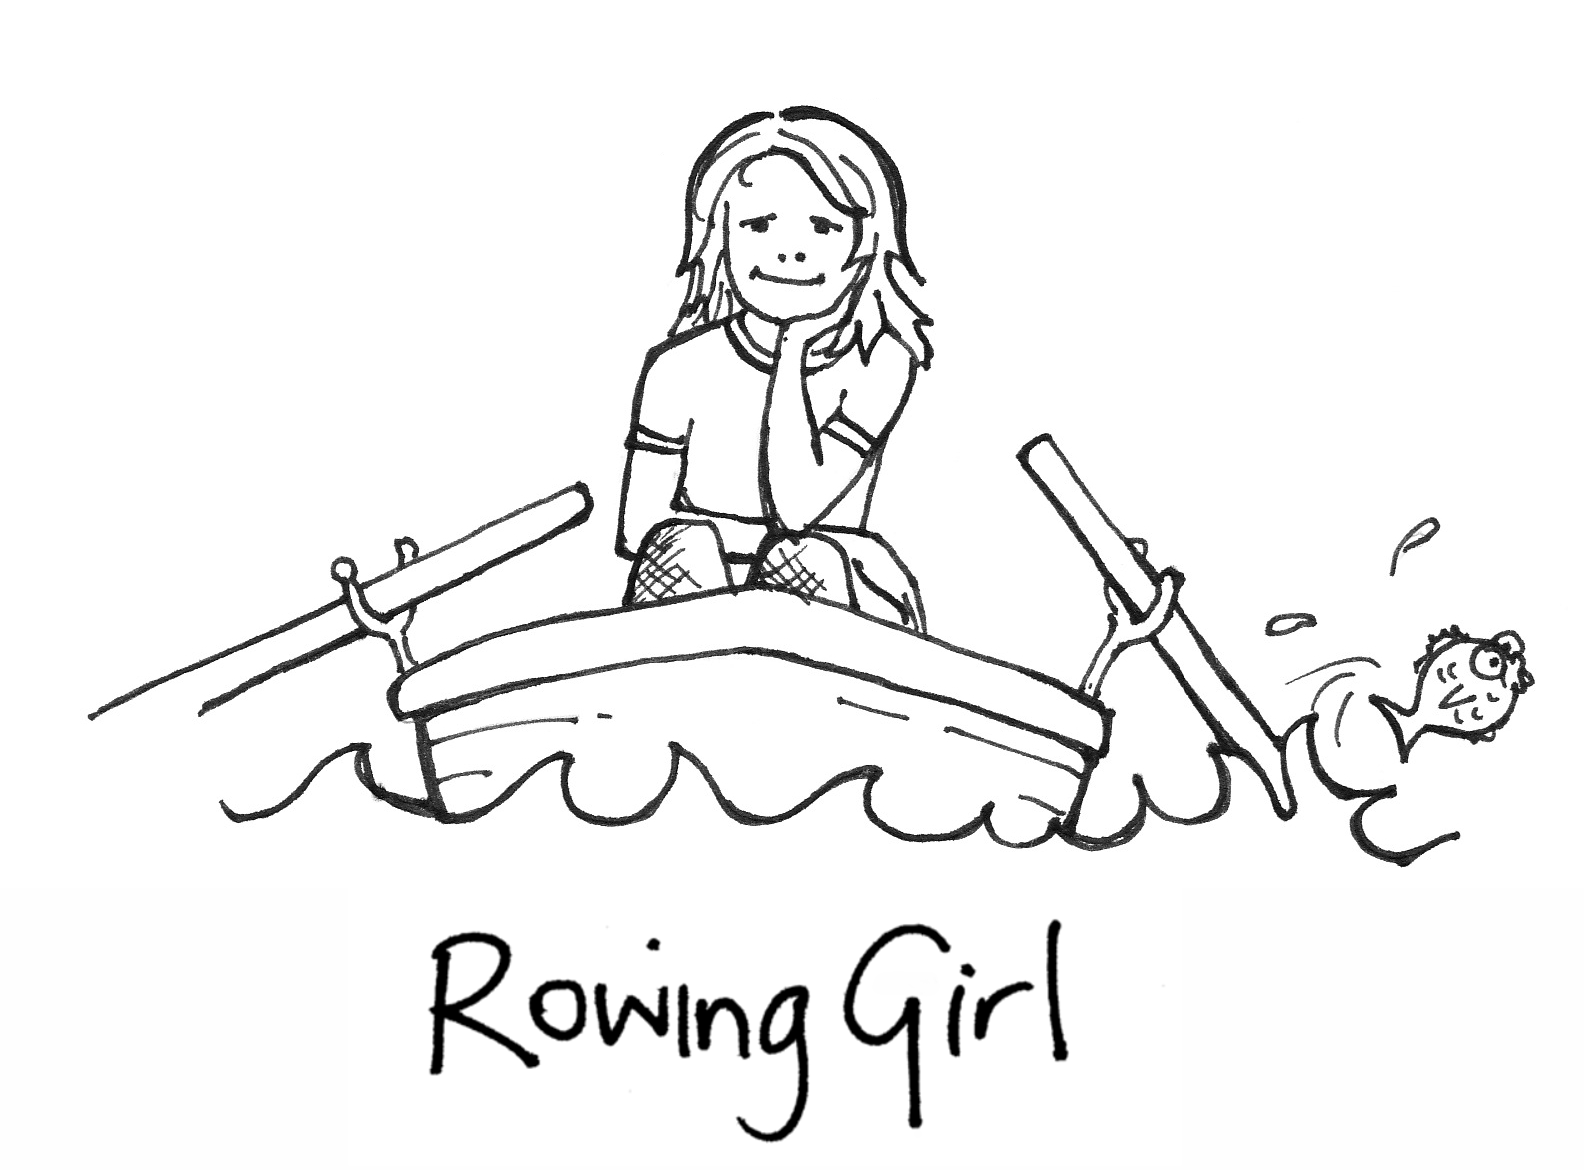 Rowing Girl Productions